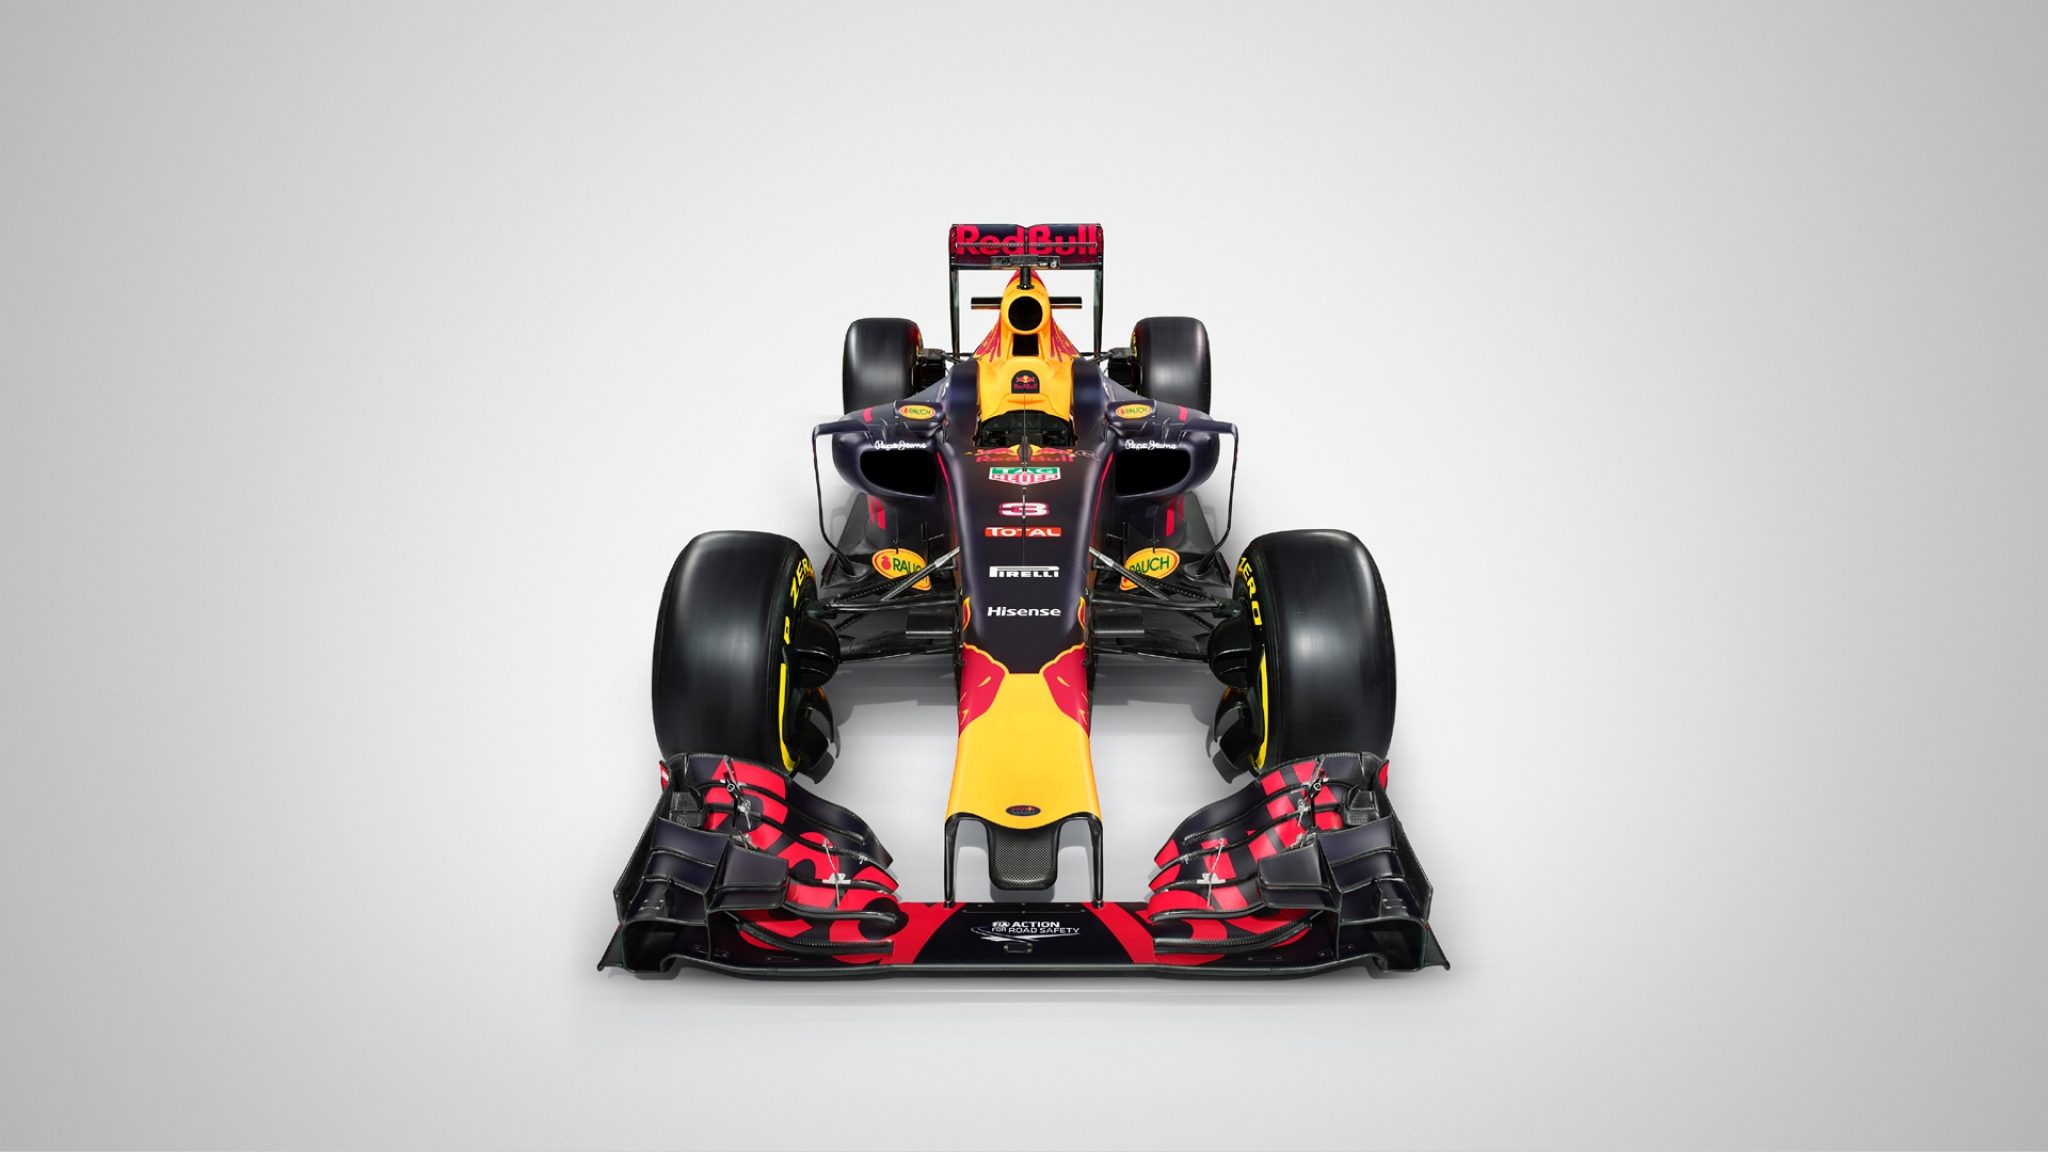 Red Bull Racing RB12